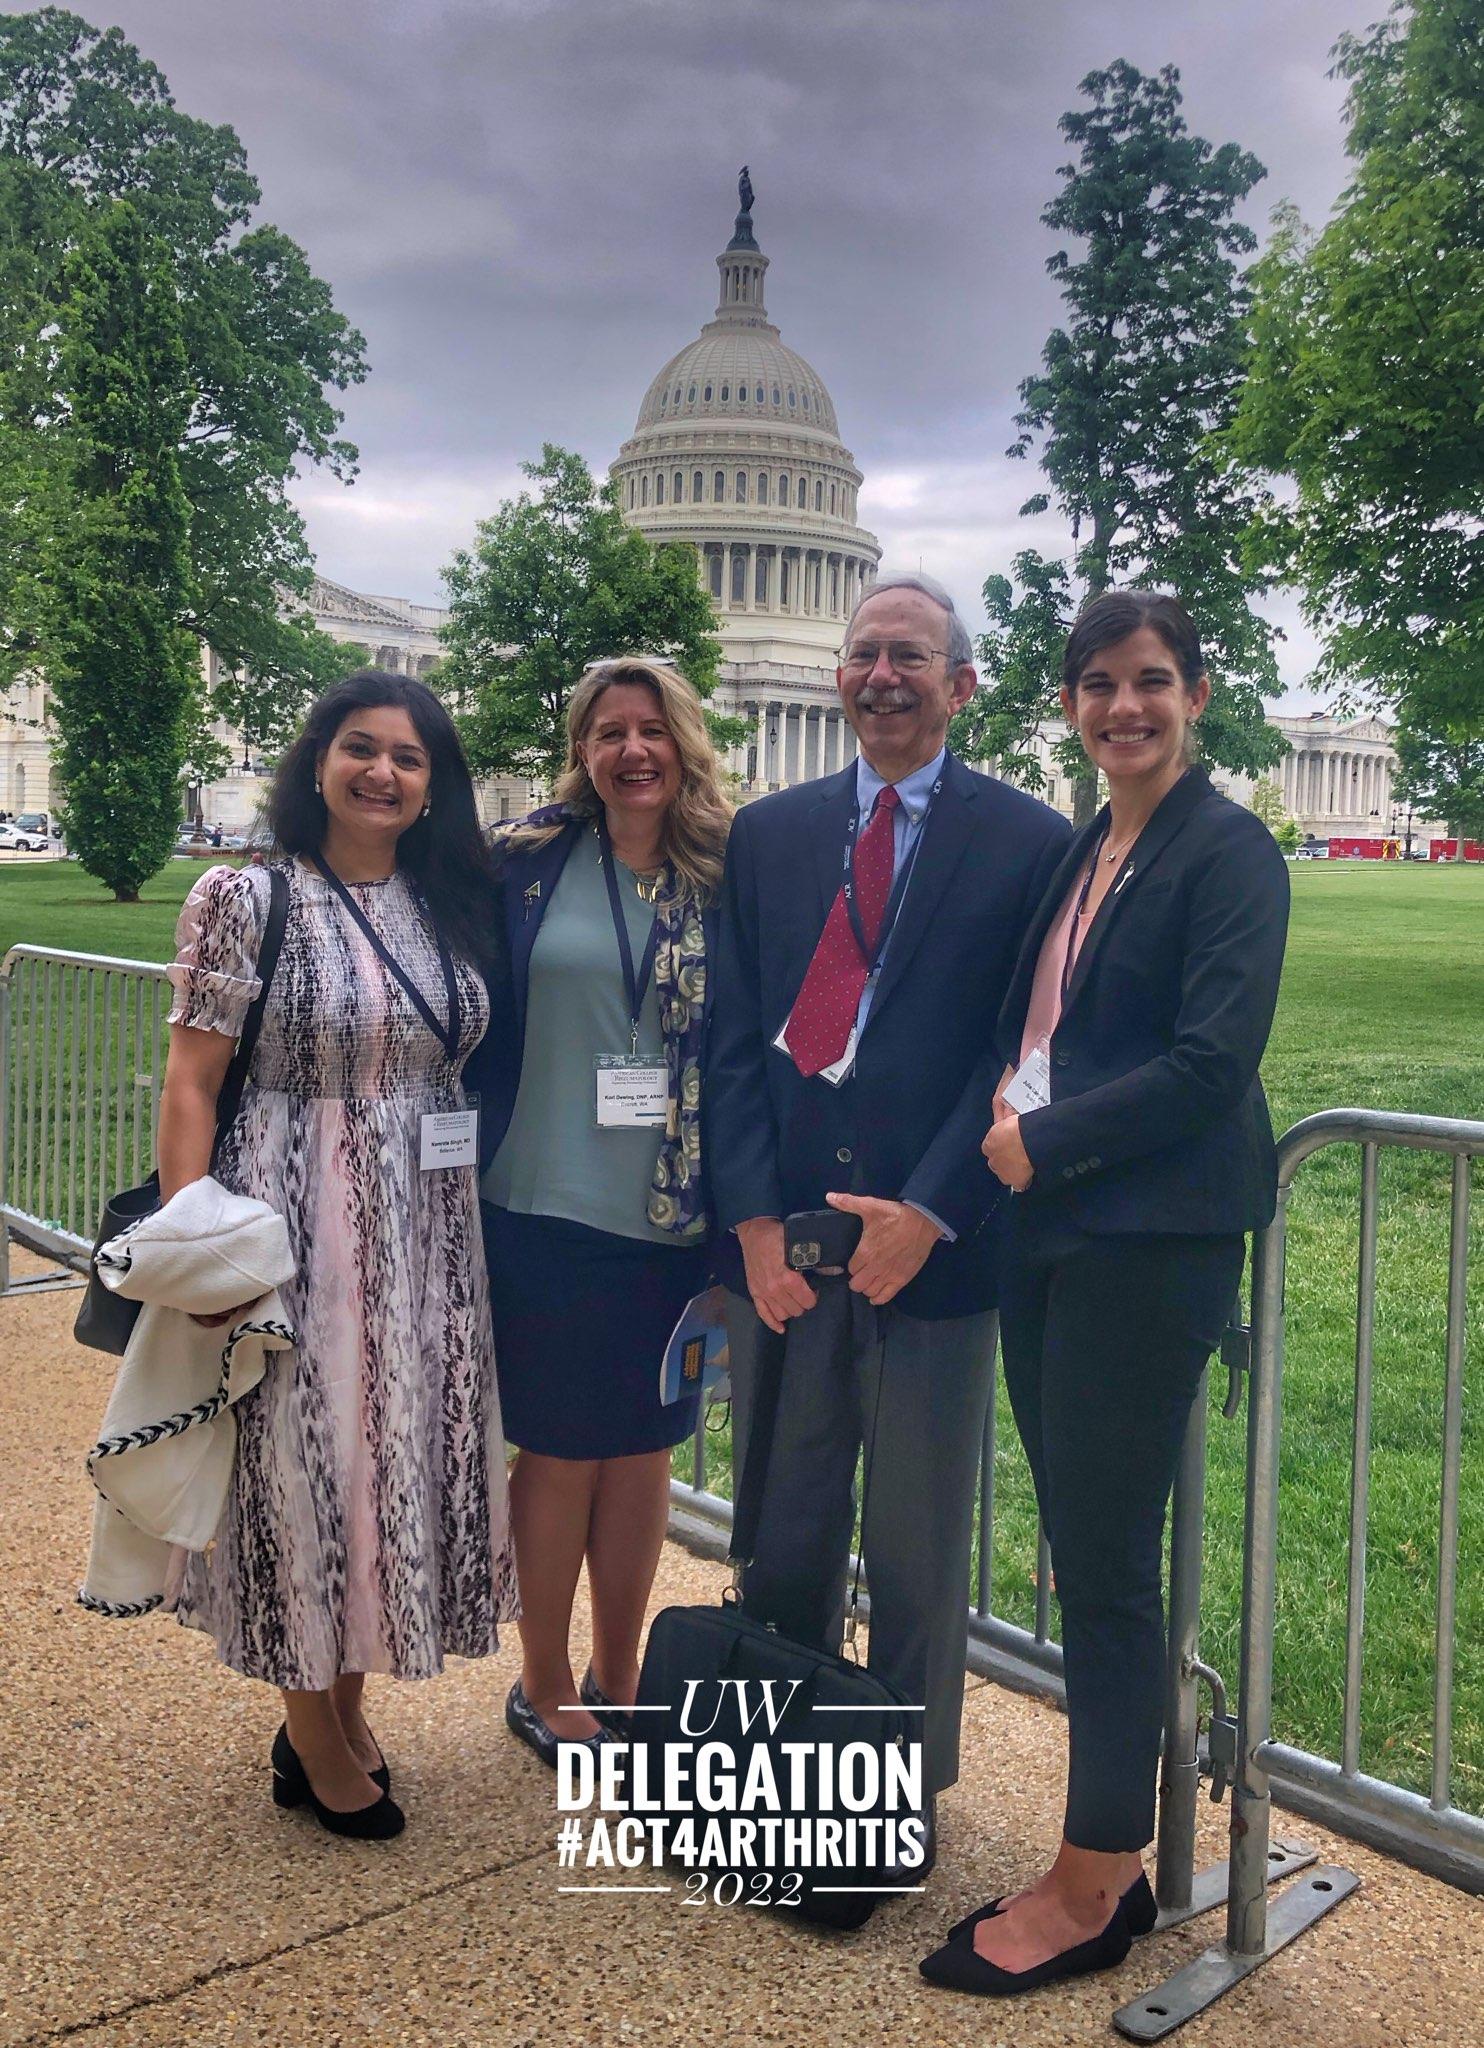 Dr. Namrata Singh, MD, MSCI, FACP, Dr. Mark Wener, MD, Dr. Kori Dewing, DNP, ANP-BC, ARNP and Dr. Julie Campbell, MD attended the 2022 ACR Advocacy Leadership Conference in Washington, DC.